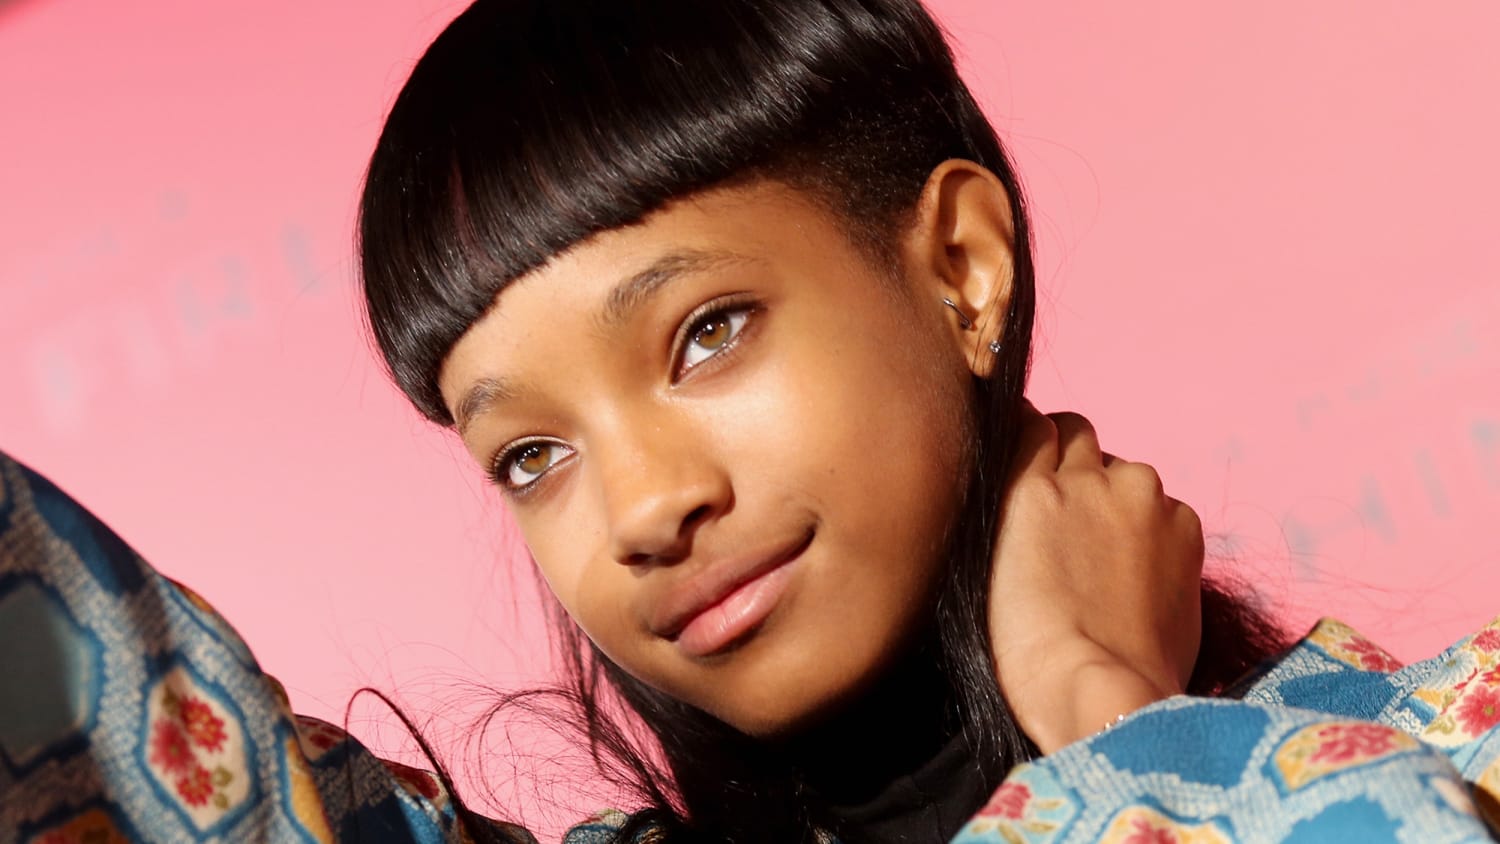 From 'Whip My Hair' to the runway: Willow Smith lands modeling contract